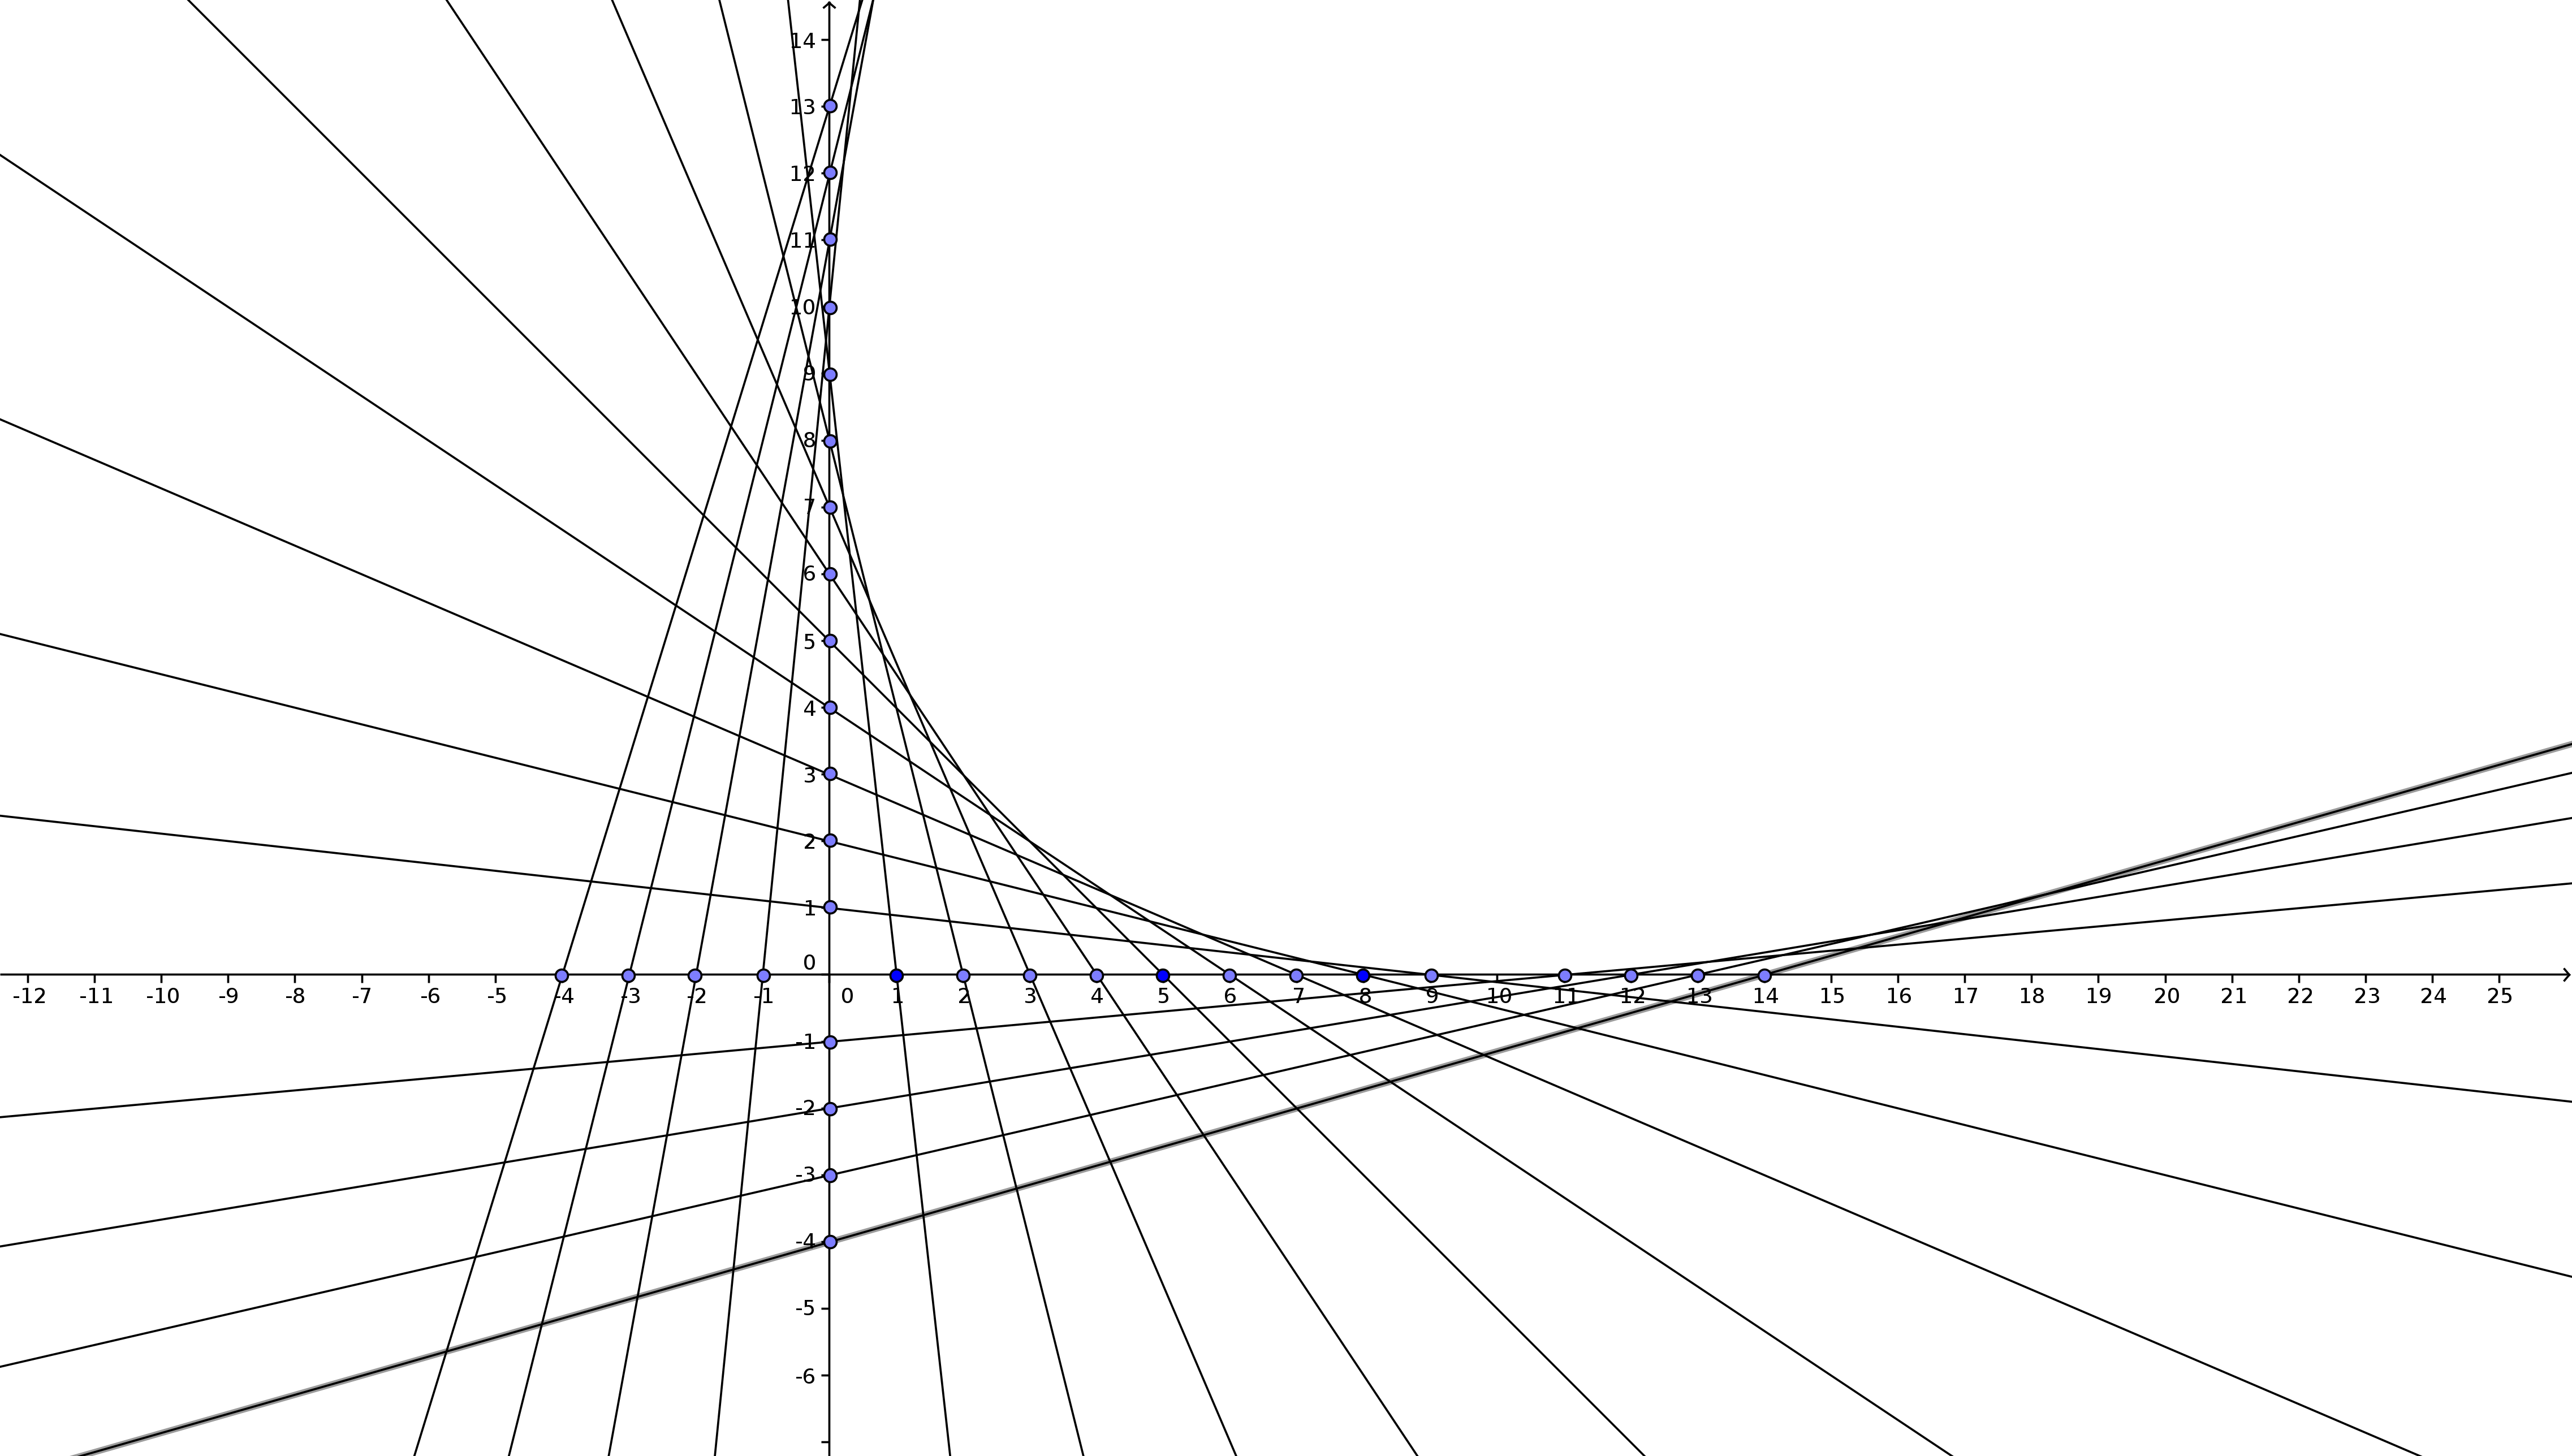 section line geometry